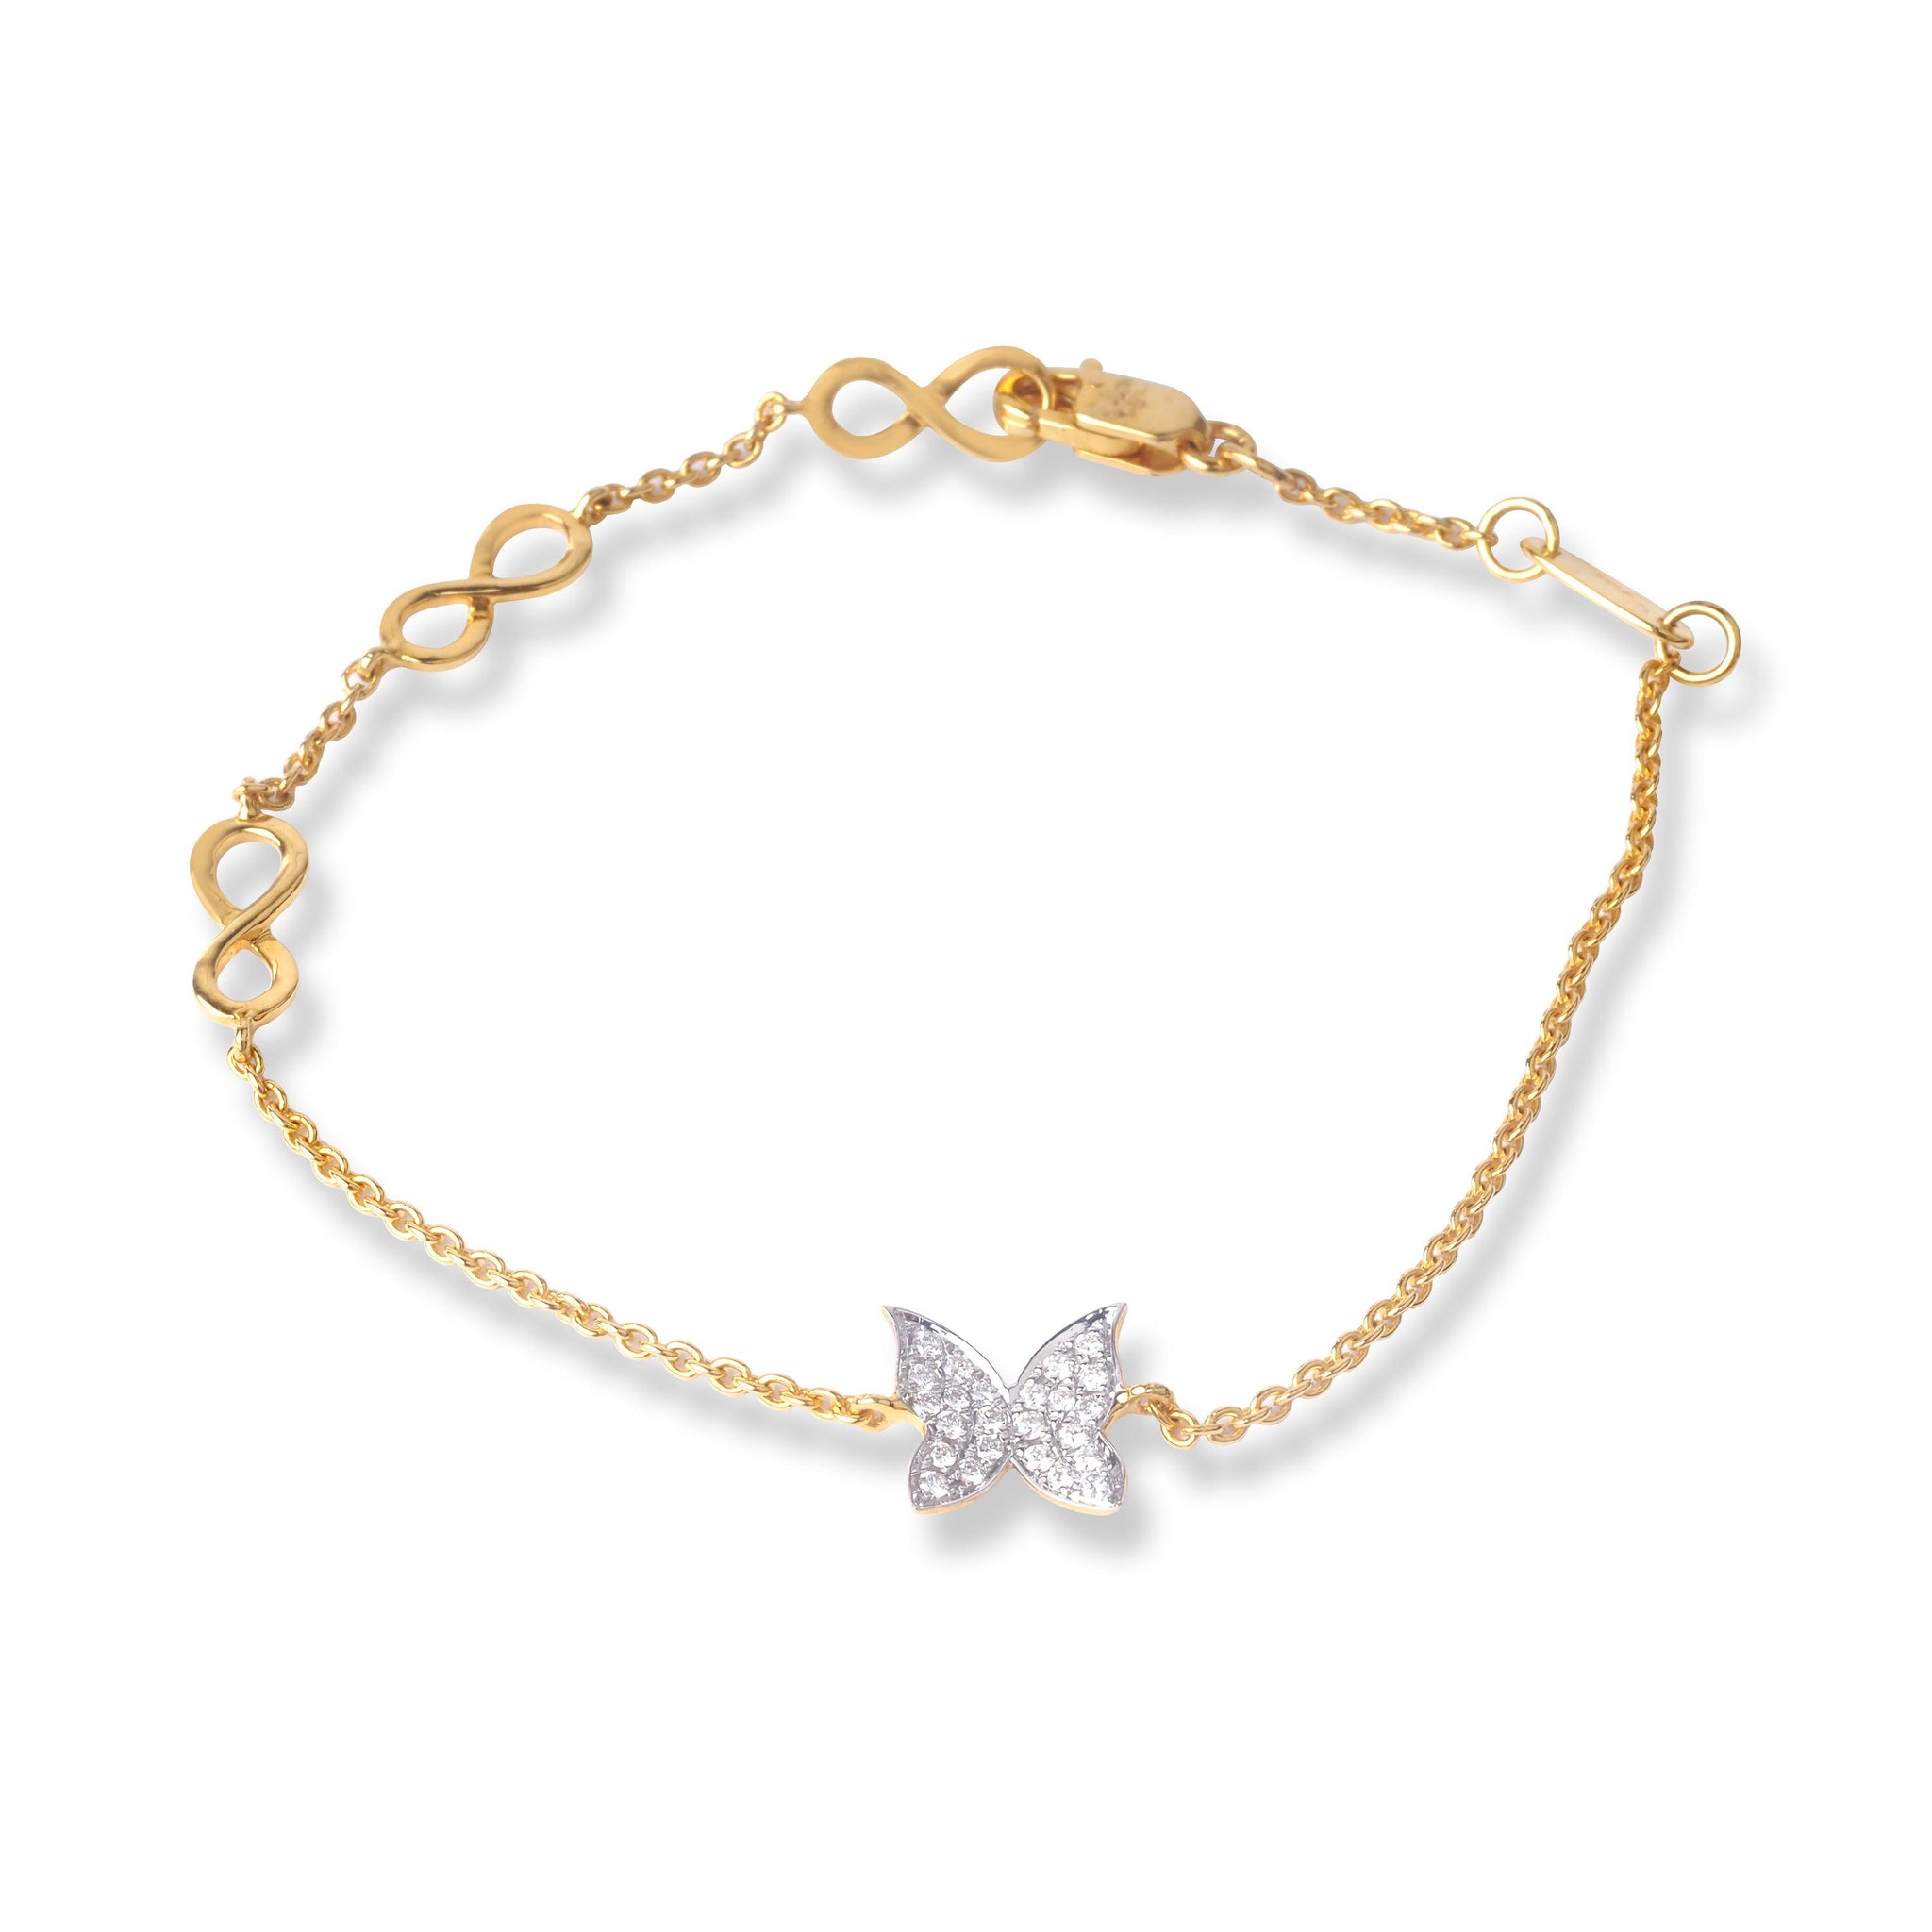 18ct Yellow Gold Adjustable Diamond Bracelet with Butterfly and Infinity Symbol Design and Lobster Clasp MCS6252